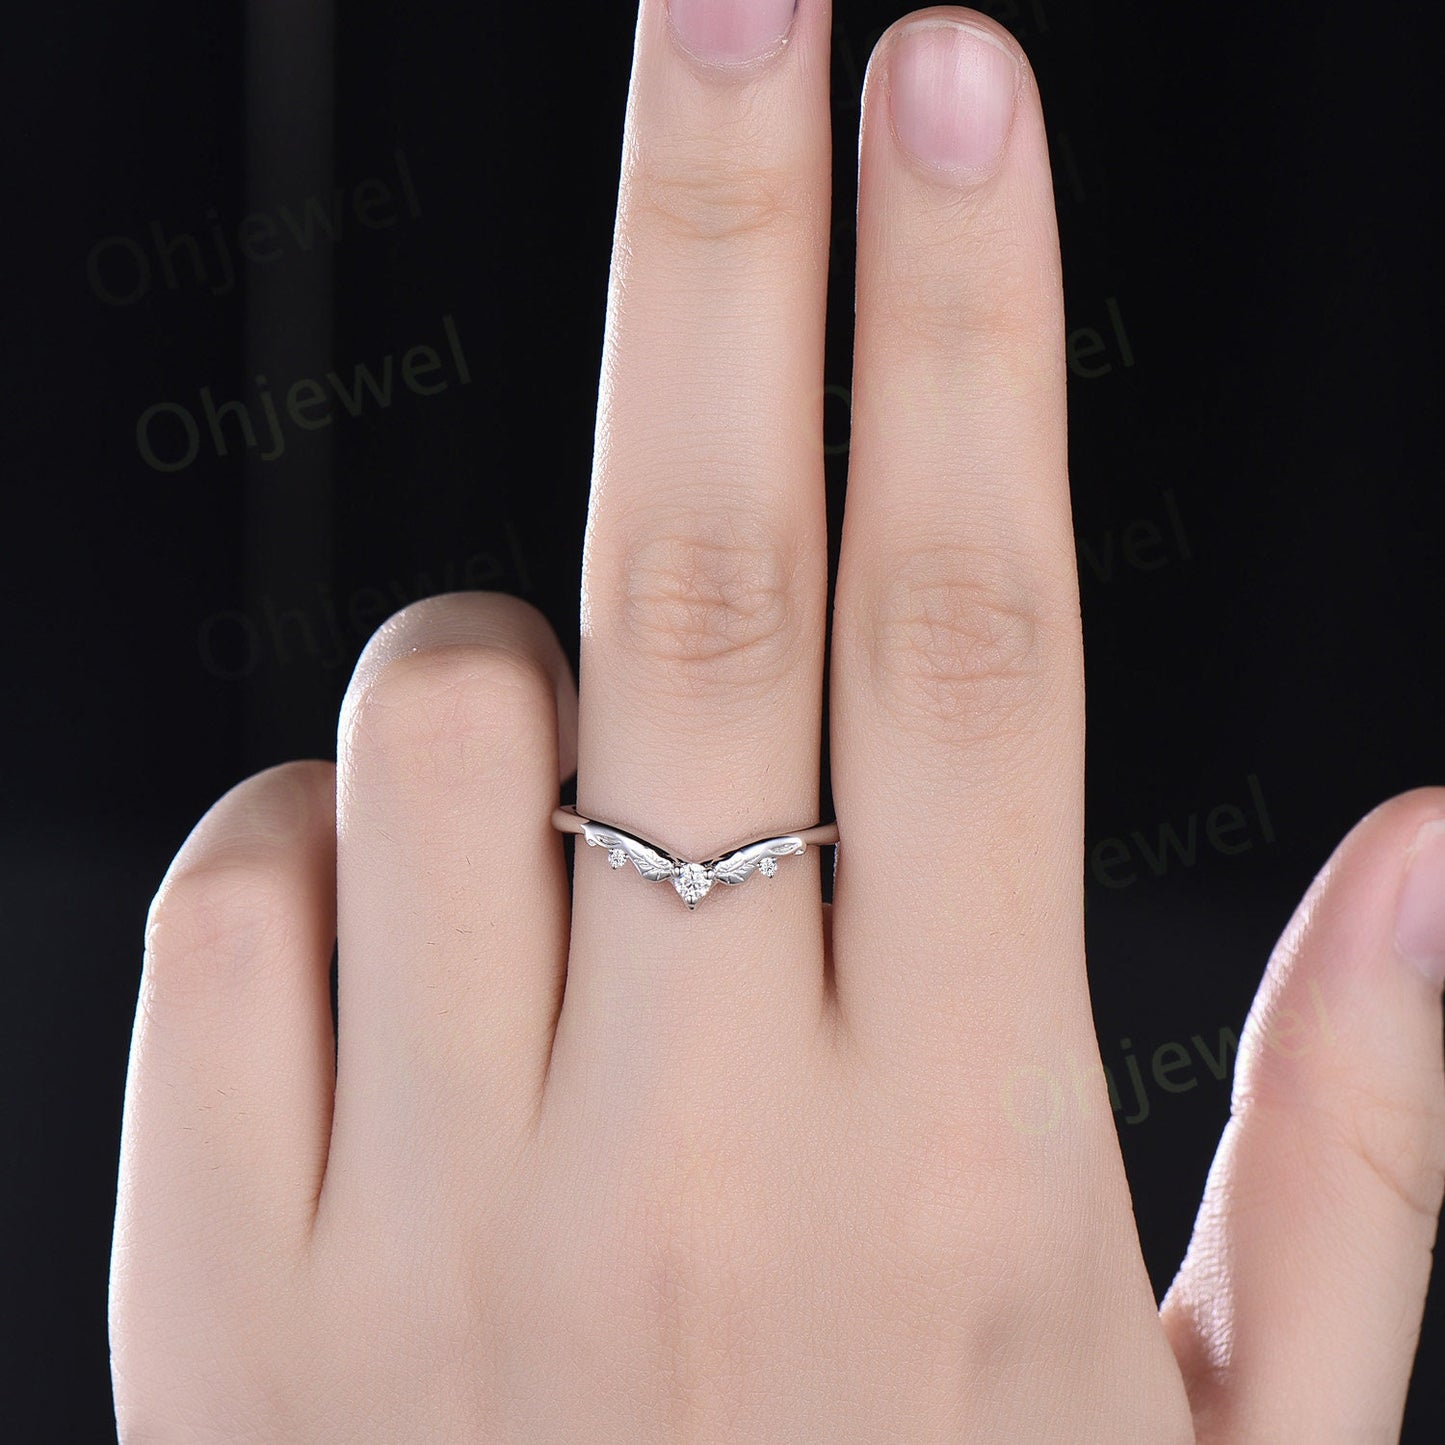 Unique three stone diamond wedding ring band 14k white gold sterling silver dainty curved vintage anniversary ring women bridal promise band